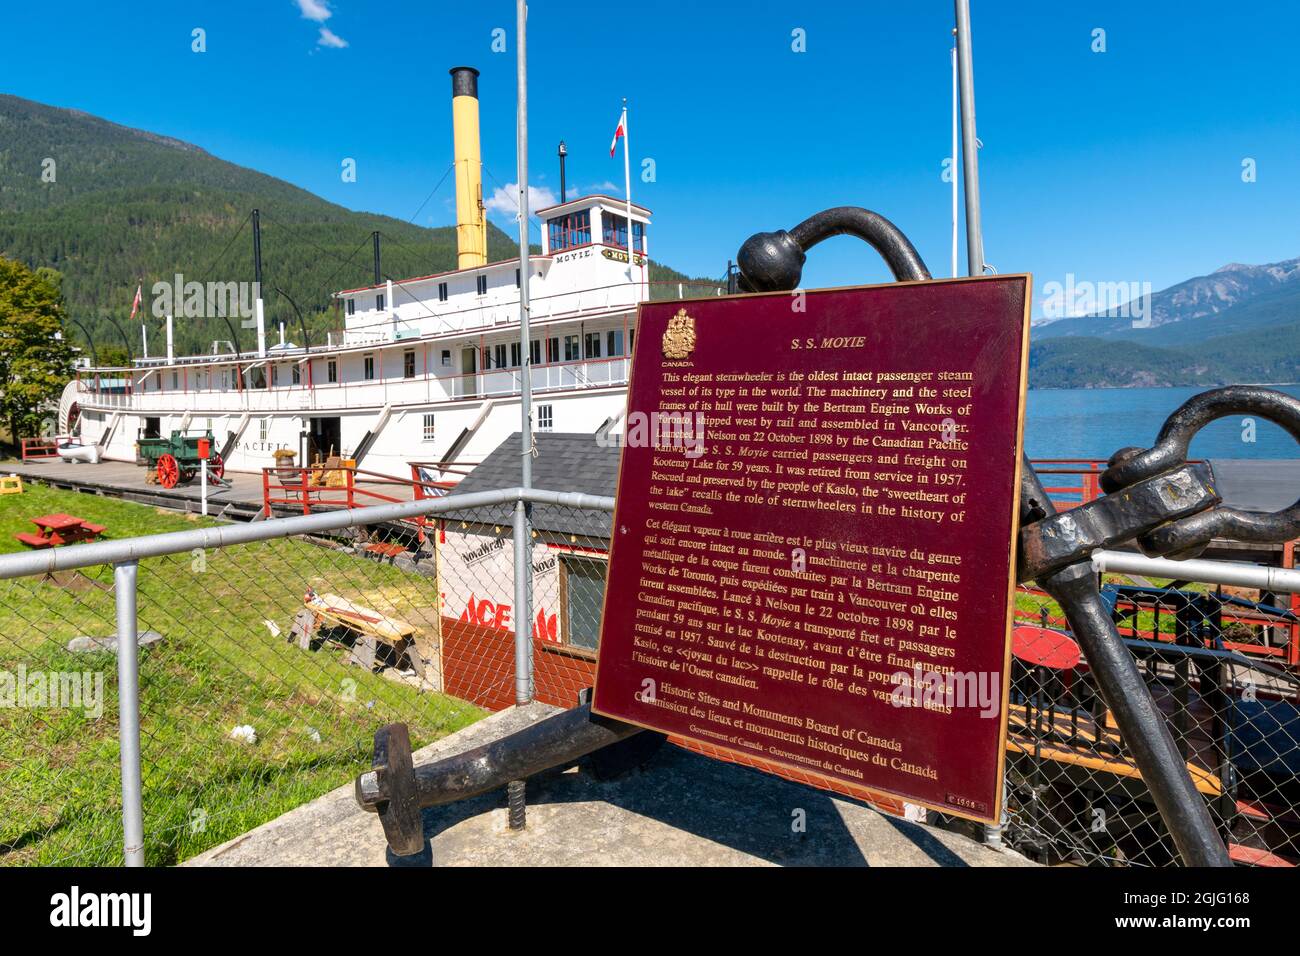 The Sternwheeler Paddlewheel boat SS Moyie, now a tourist attraction on the banks of Kootenay Lake at summer with the information sign Stock Photo